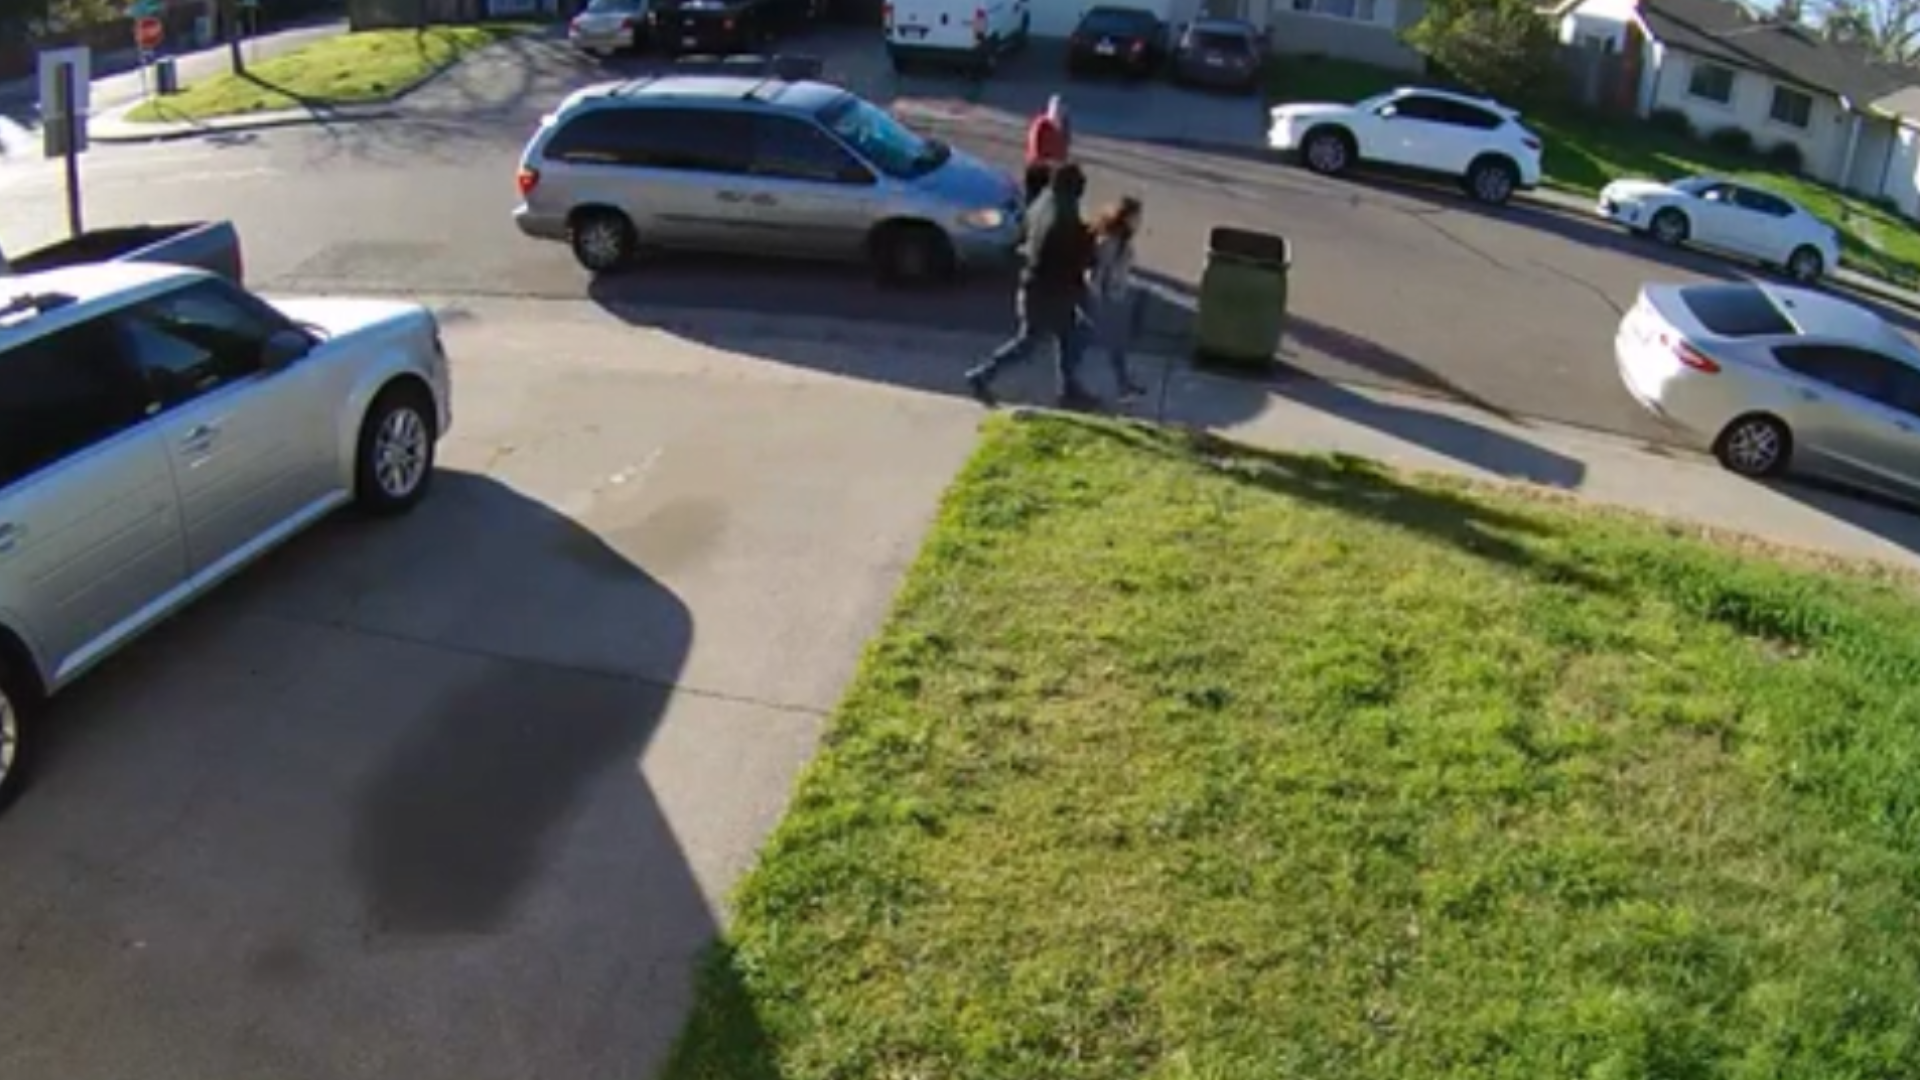 The video shows a man forcefully escorting a young girl down the sidewalk before a woman driving by in a silver minivan stops and confronts him.